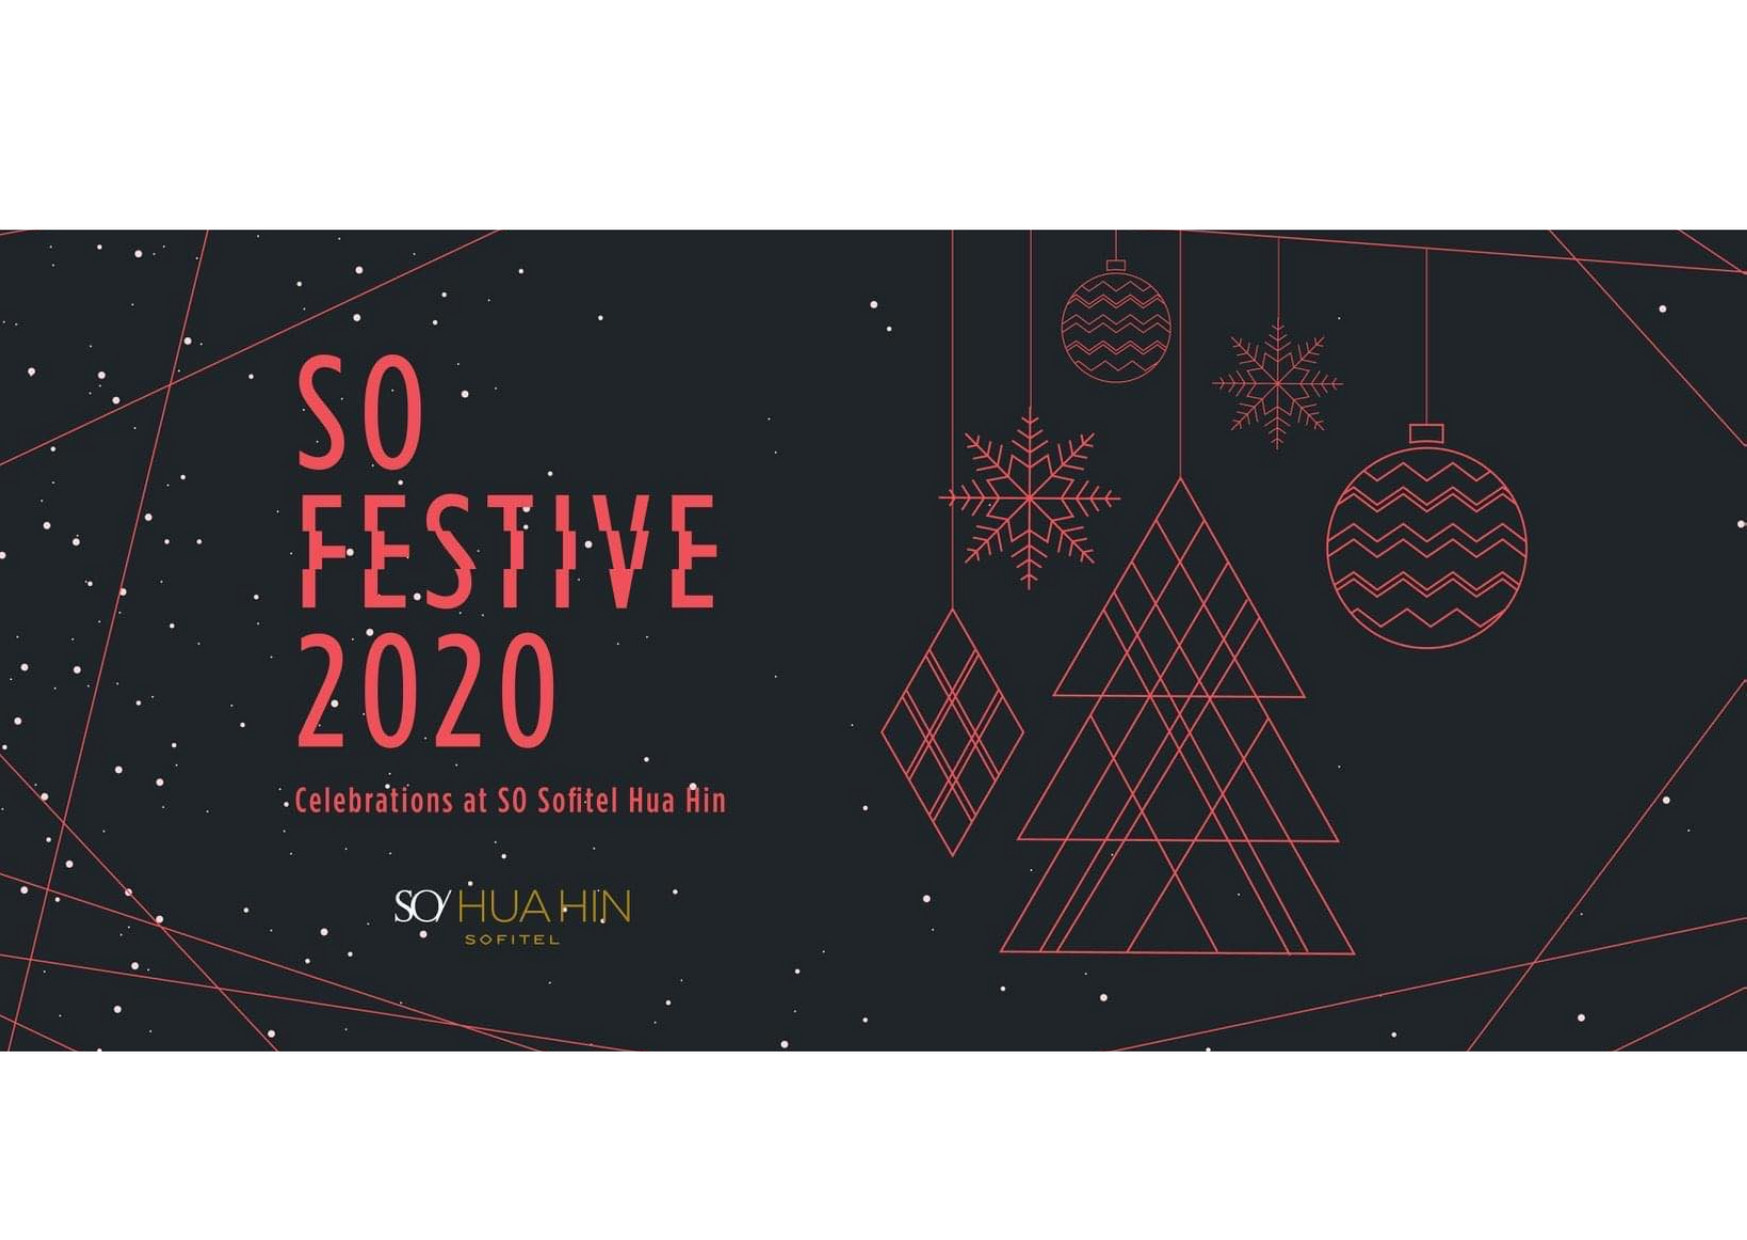 So Festive 2020 feature GIveaway